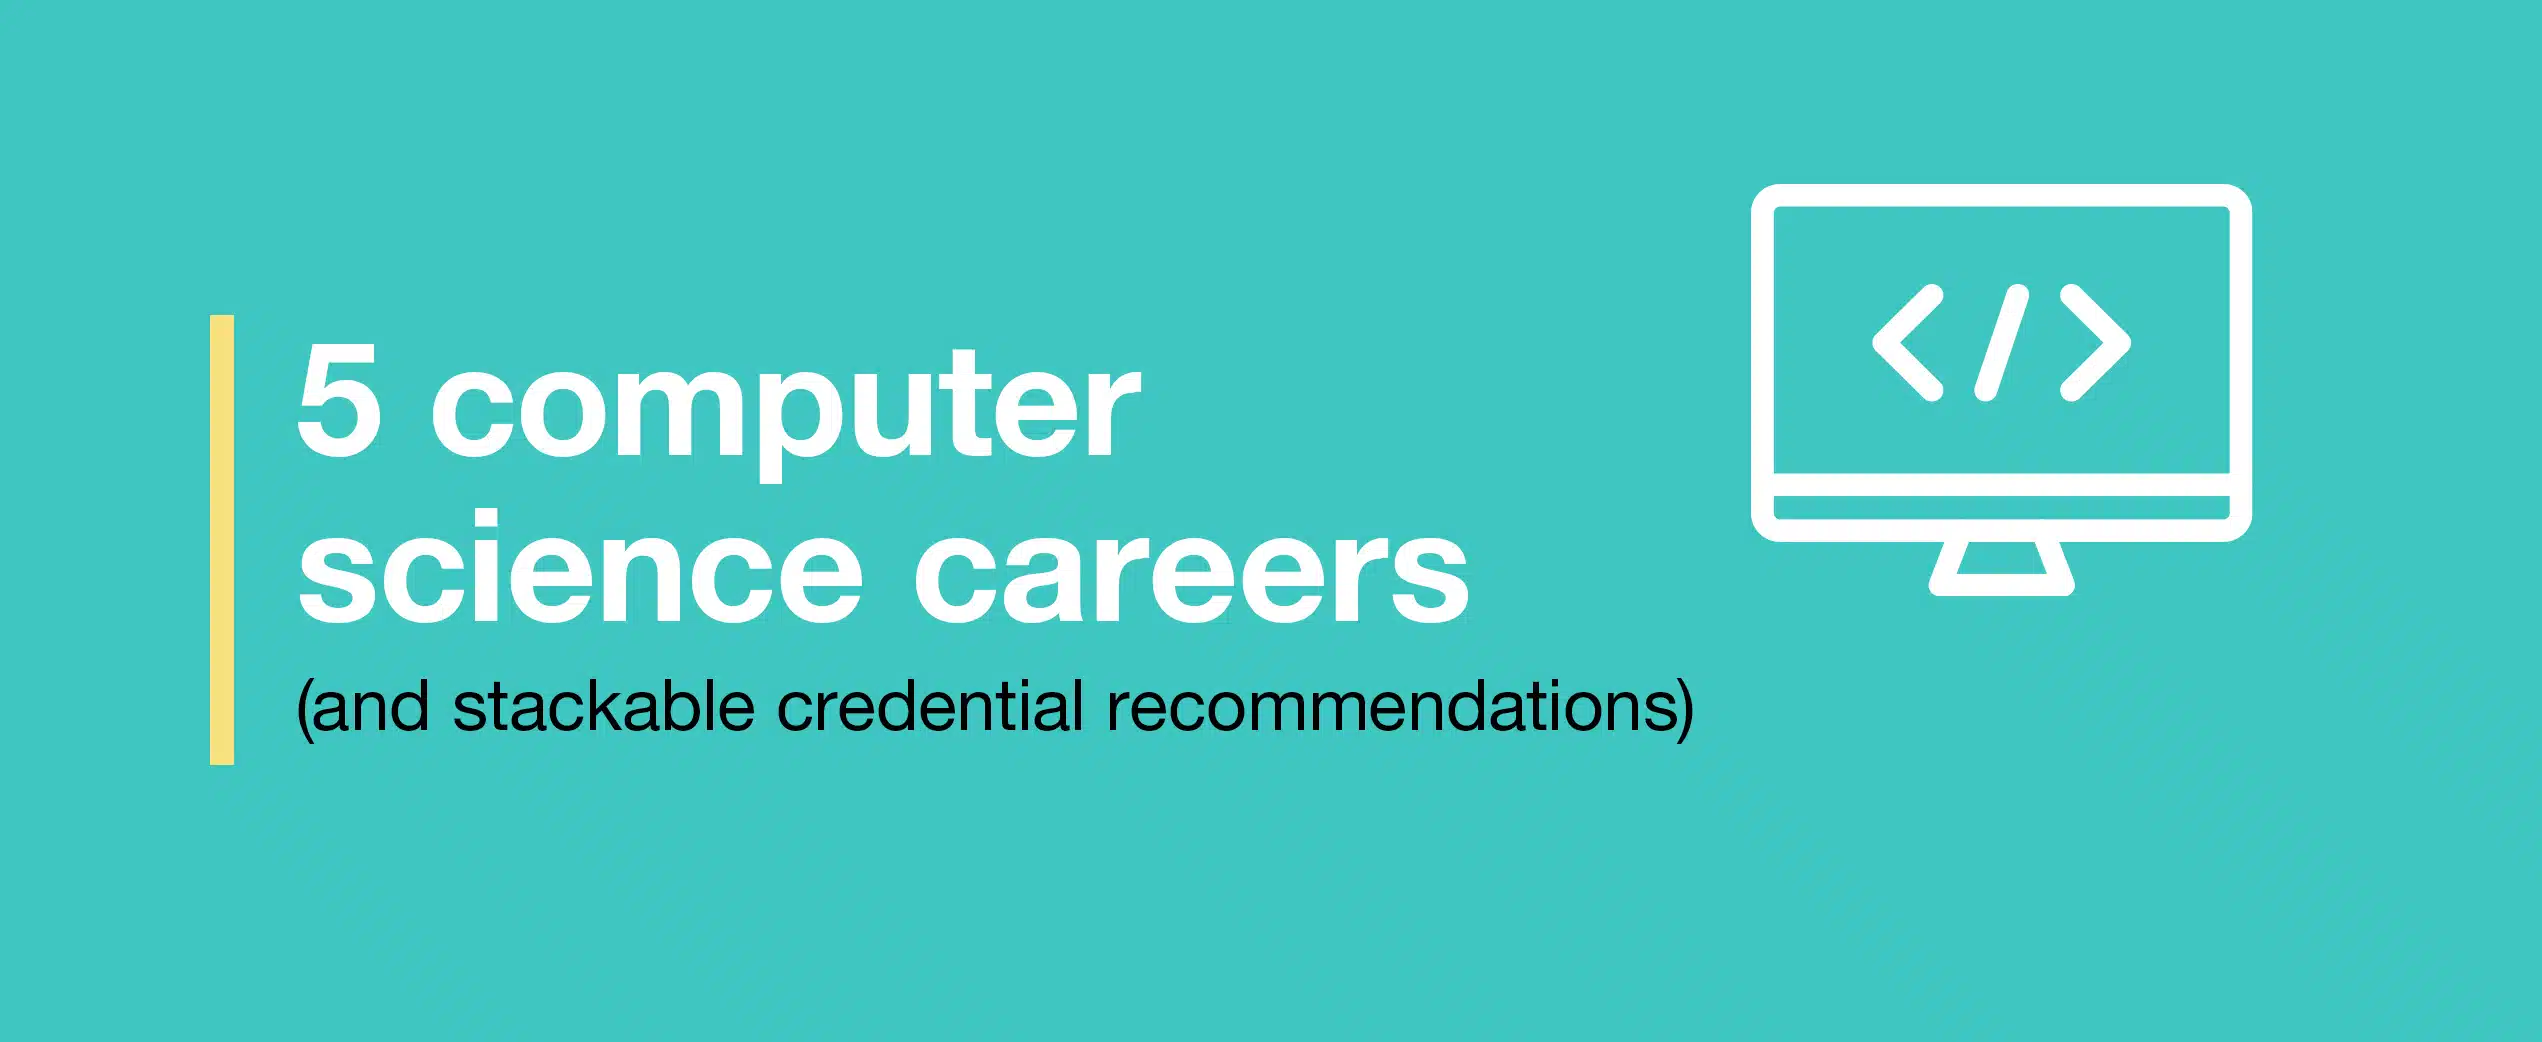 5 computer science careers (and stackable credential recommendations)